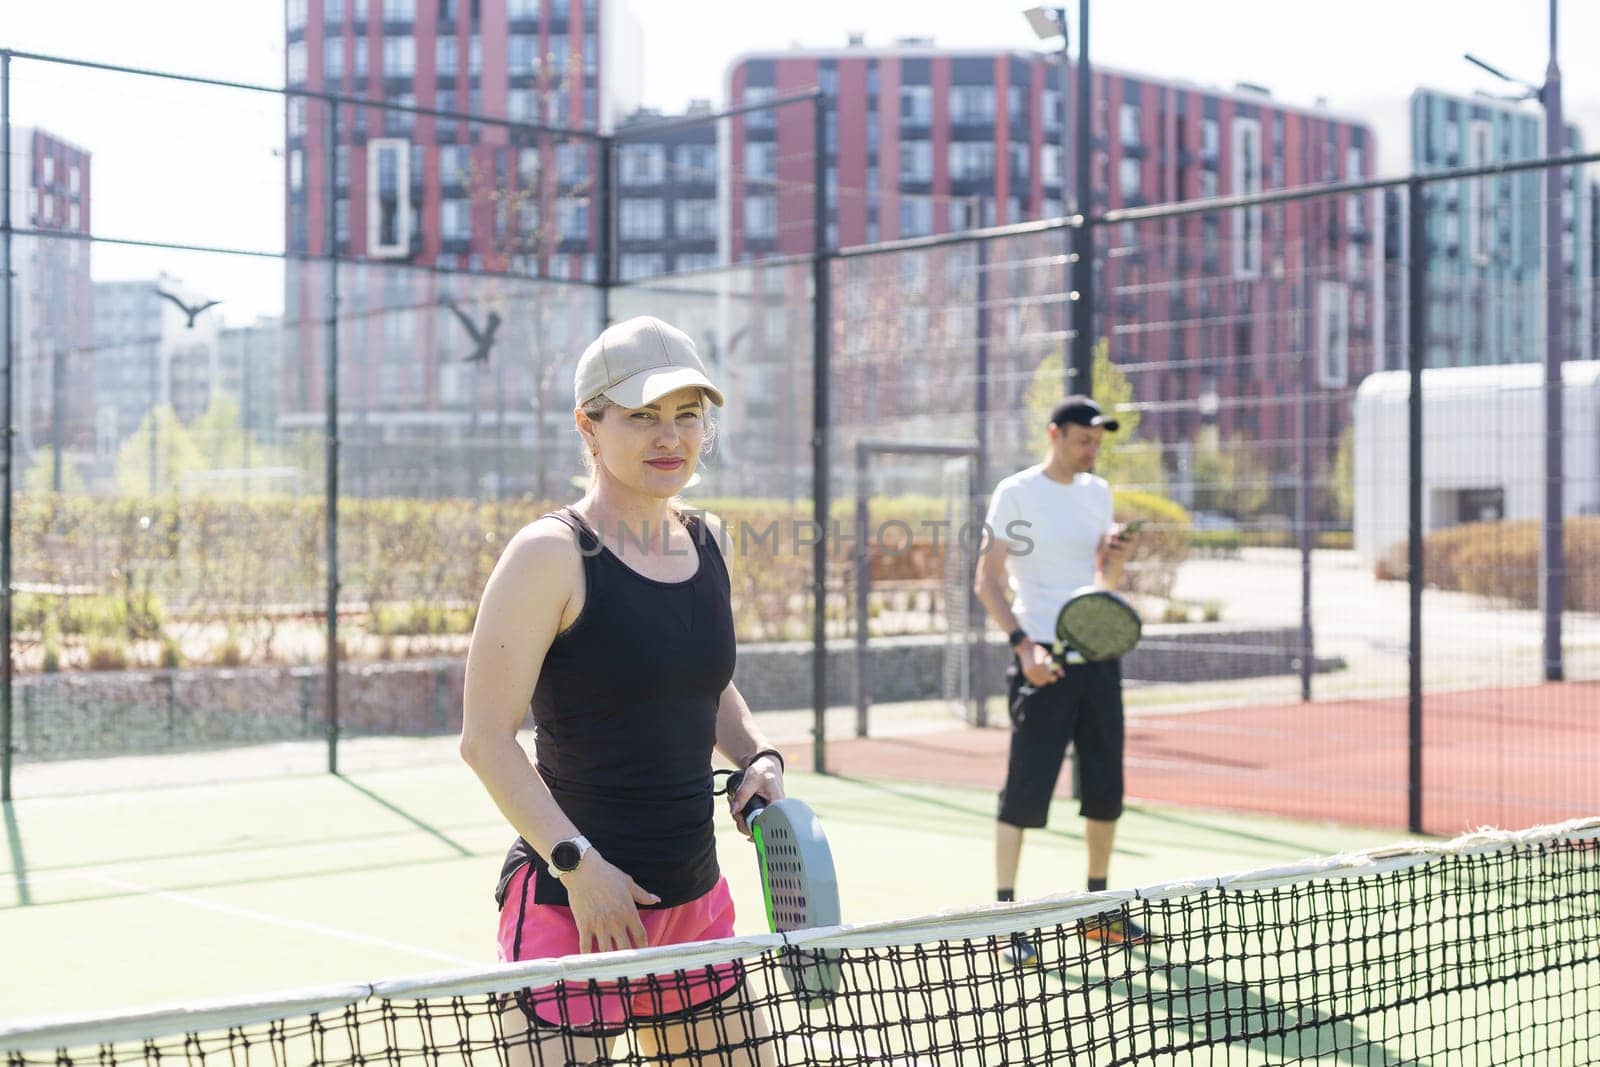 Portrait of positive young woman and adult man standing on padel tennis court, holding racket and ball, smiling. High quality photo